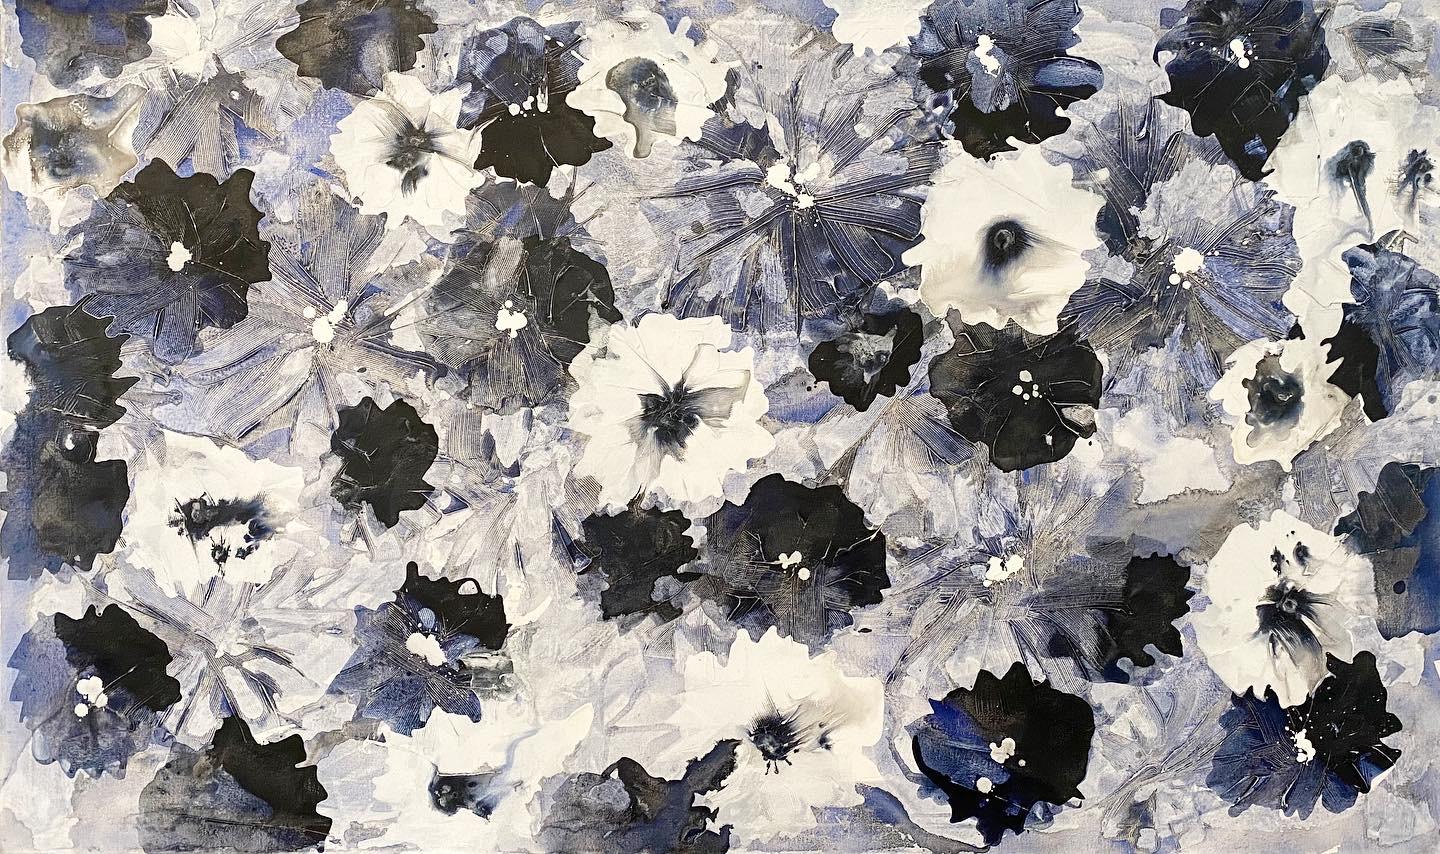 Blue Jean Bloom, 2020, Floral Abstract Painting, Mixed Media on Canvas, Signed  - Mixed Media Art by Annie Mandelkern